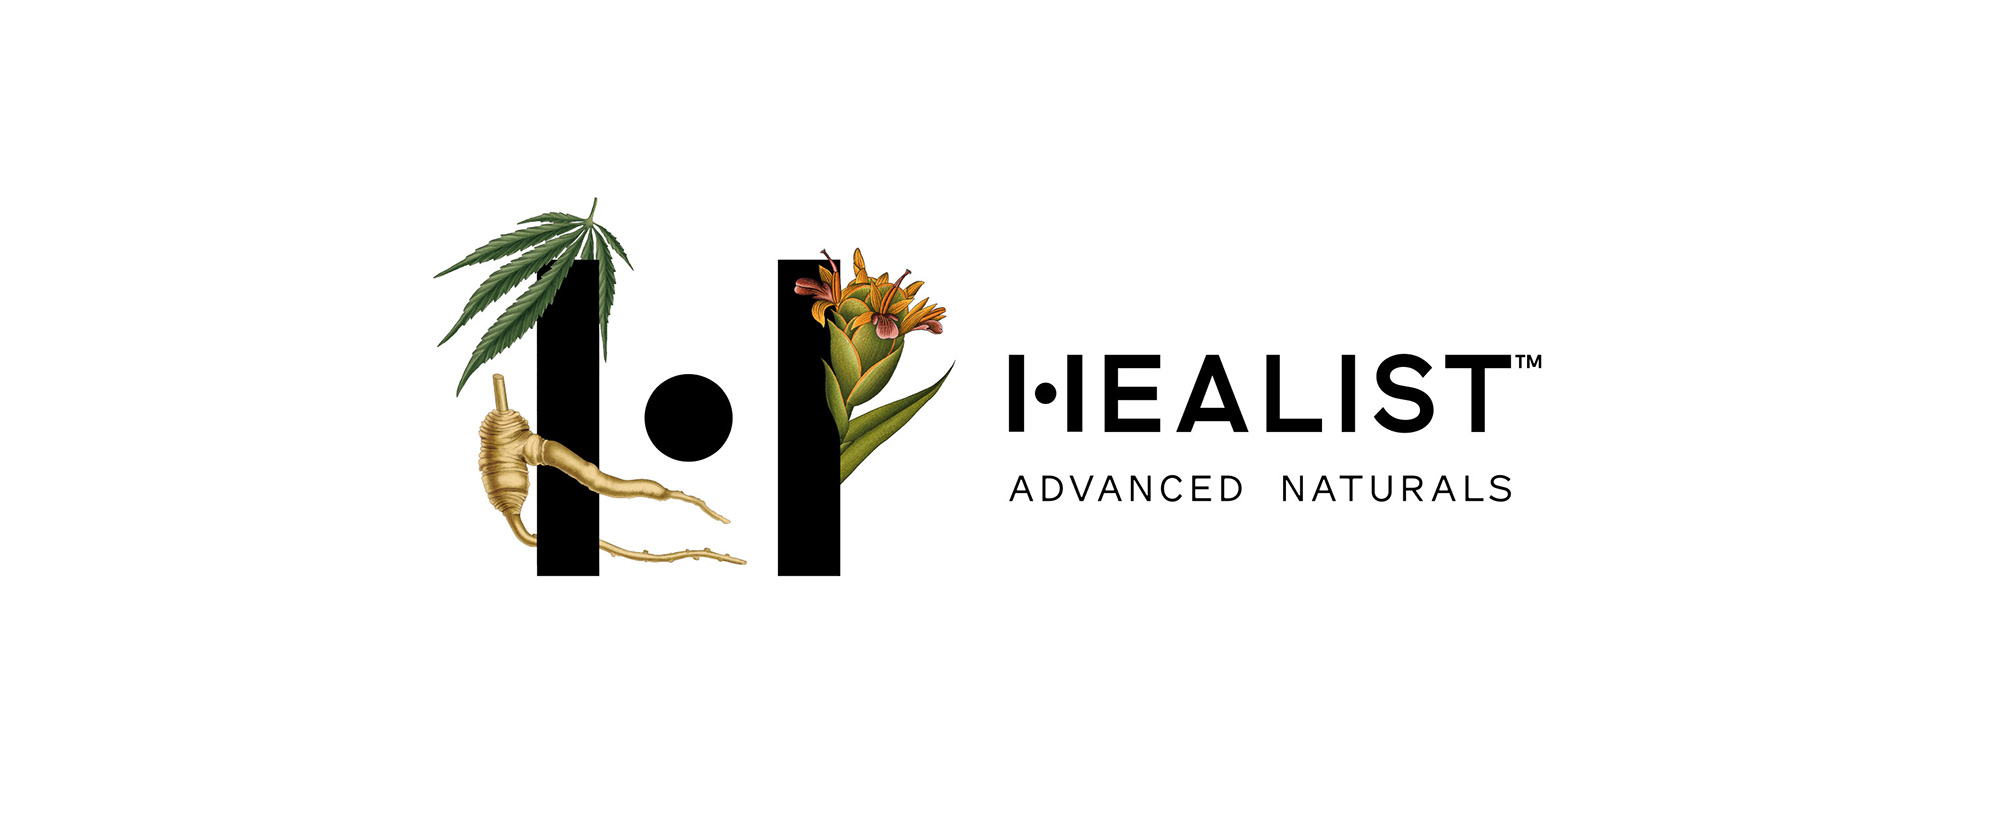 Brand New: New Logo, Identity, and Packaging for Healist Naturals ...